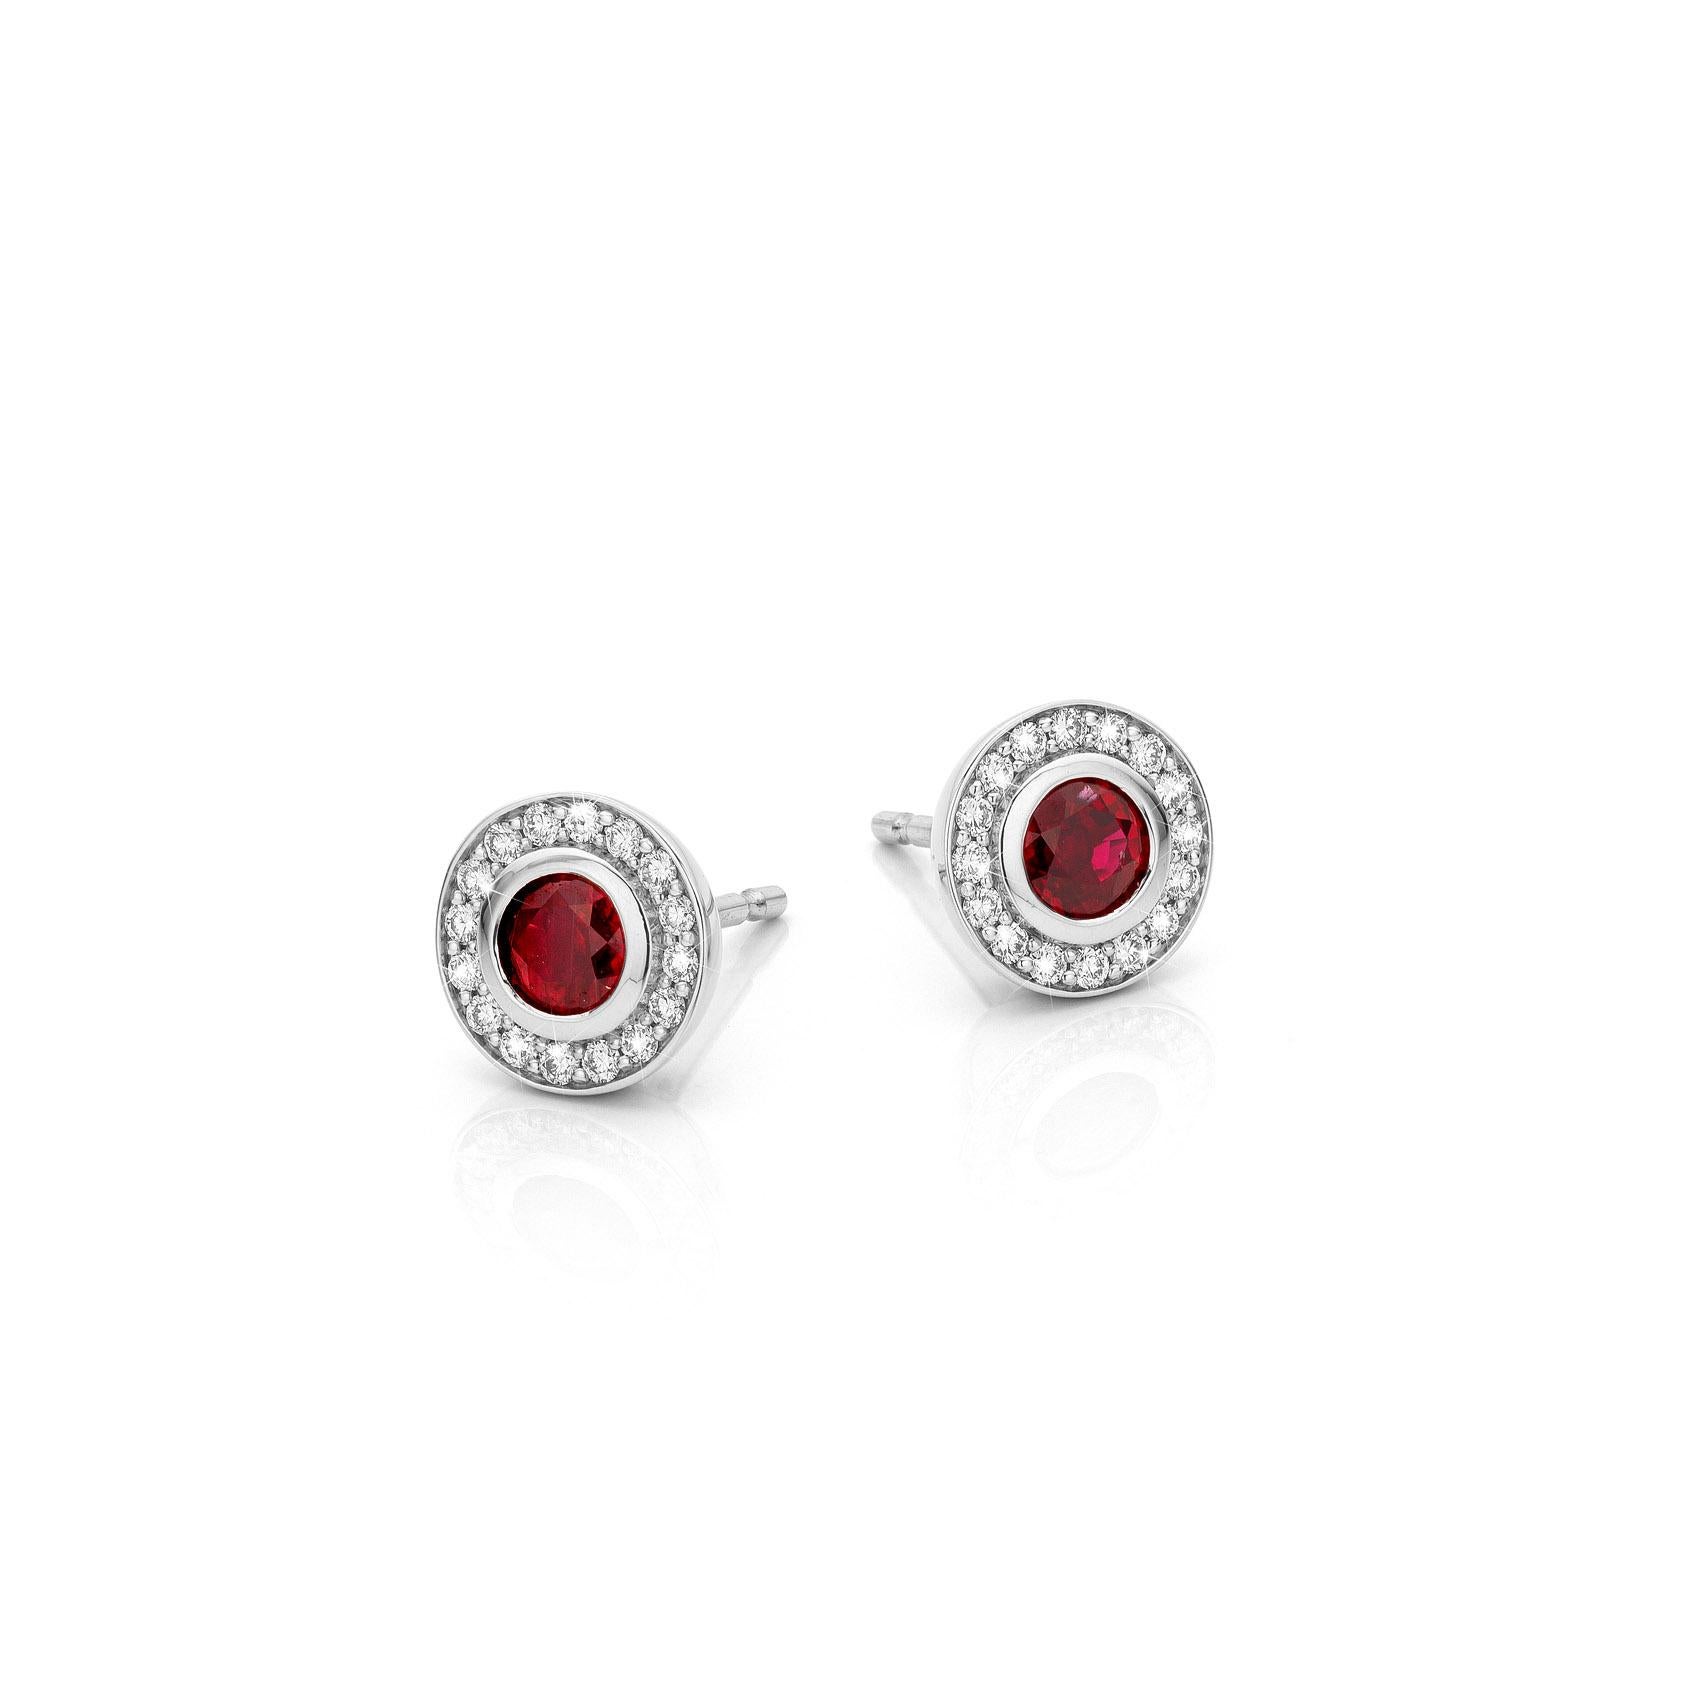 Contemporary Cober 1.16 Carat Mozambique Ruby with 16 x 0.01 ct. Diamonds Stud Earrings For Sale